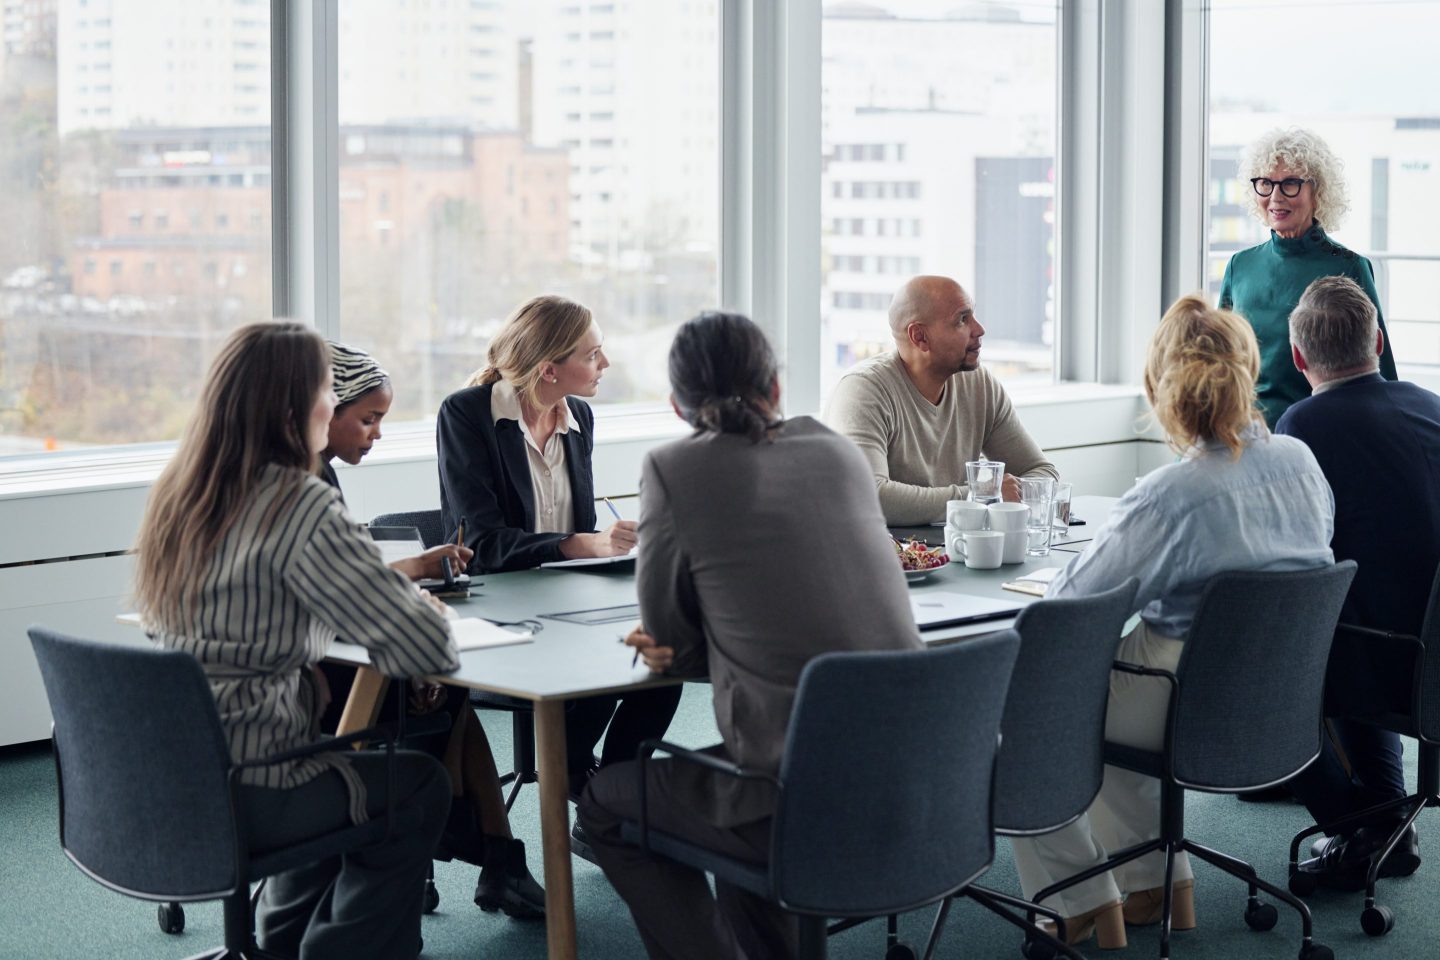 Eight people are gathered around a conference table with windows facing the city skyline